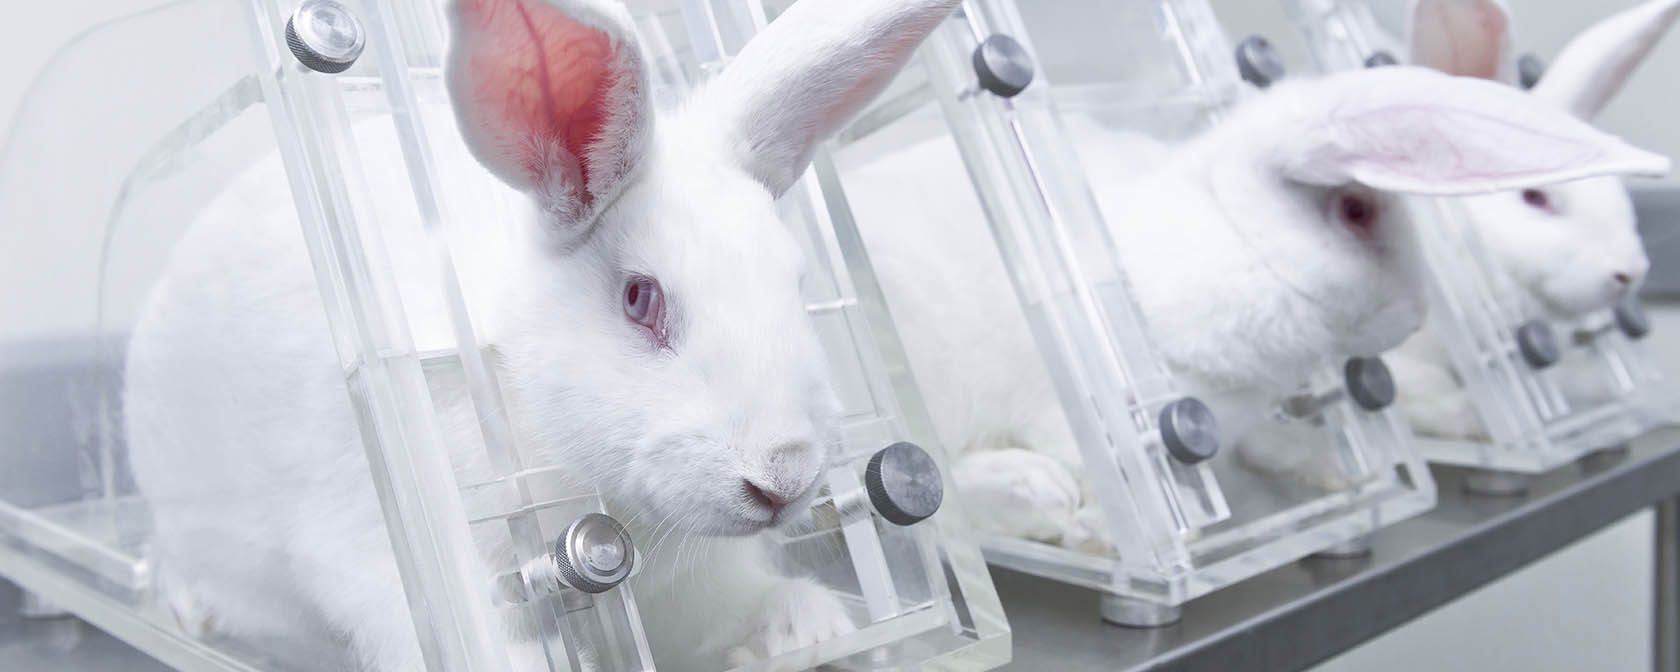 Major win: Canada just banned cosmetics animal testing and trade